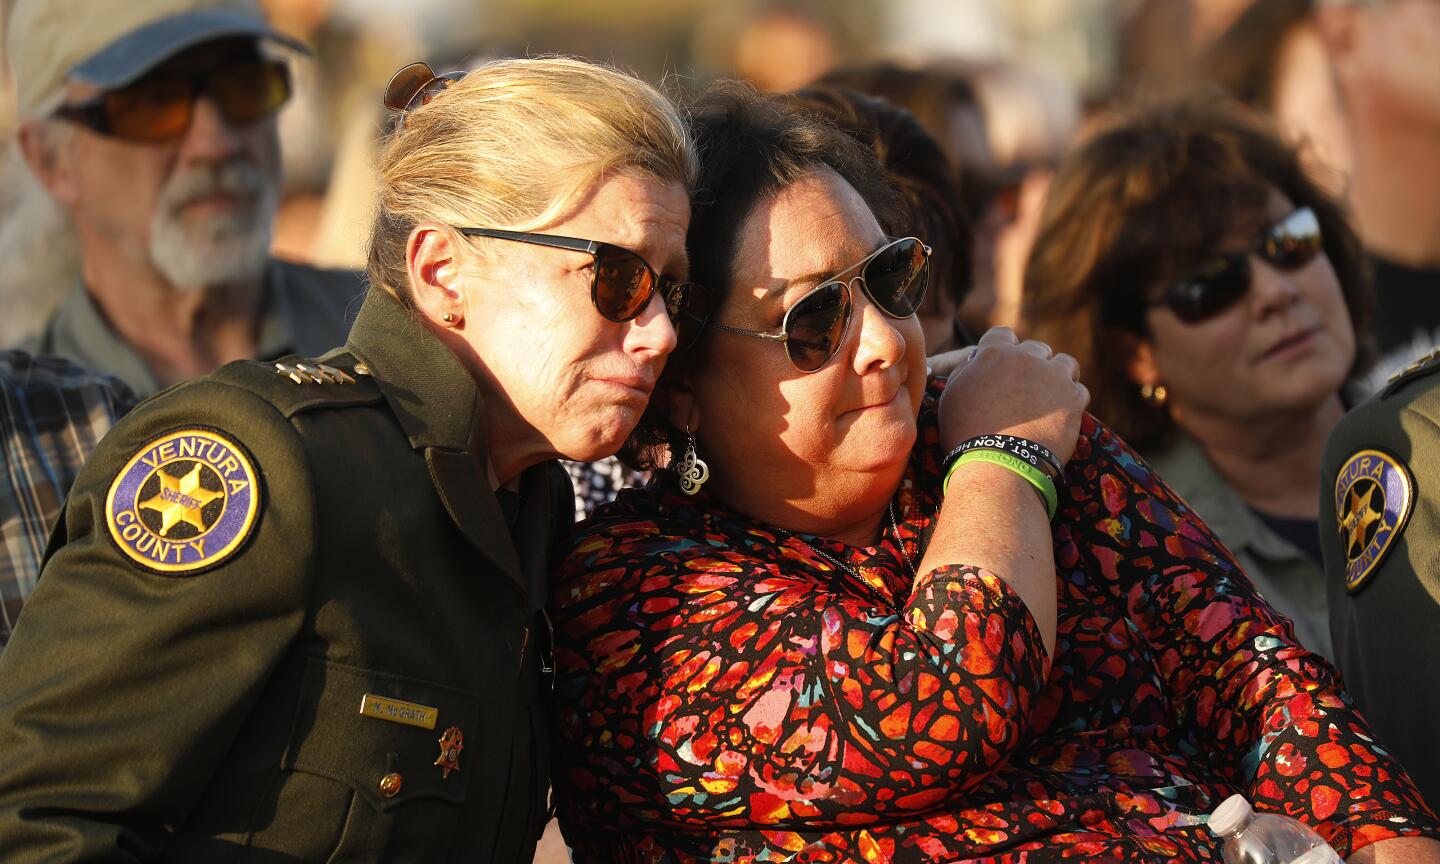 THOUSAND OAKS, CA - NOVEMBER 7, 2019 Ventura County Undersheriff Monica McGrath, left, comforts Karen Helus wife of Ventura County Sheriff Sgt Ron Helus who was killed in the Borderline mass shooting during the dedication services at the Healing Garden constructed at Conejo Creek North Park in Thousand Oaks to remember the 12 lives taken and the 248 that survived the Borderline Bar and Grill mass shooting on the one-year anniversary of the mass shooting. Brandon was best friends with victim Cody Coffman and “like a brother since they were 7 years old.” (Al Seib / Los Angeles Times)